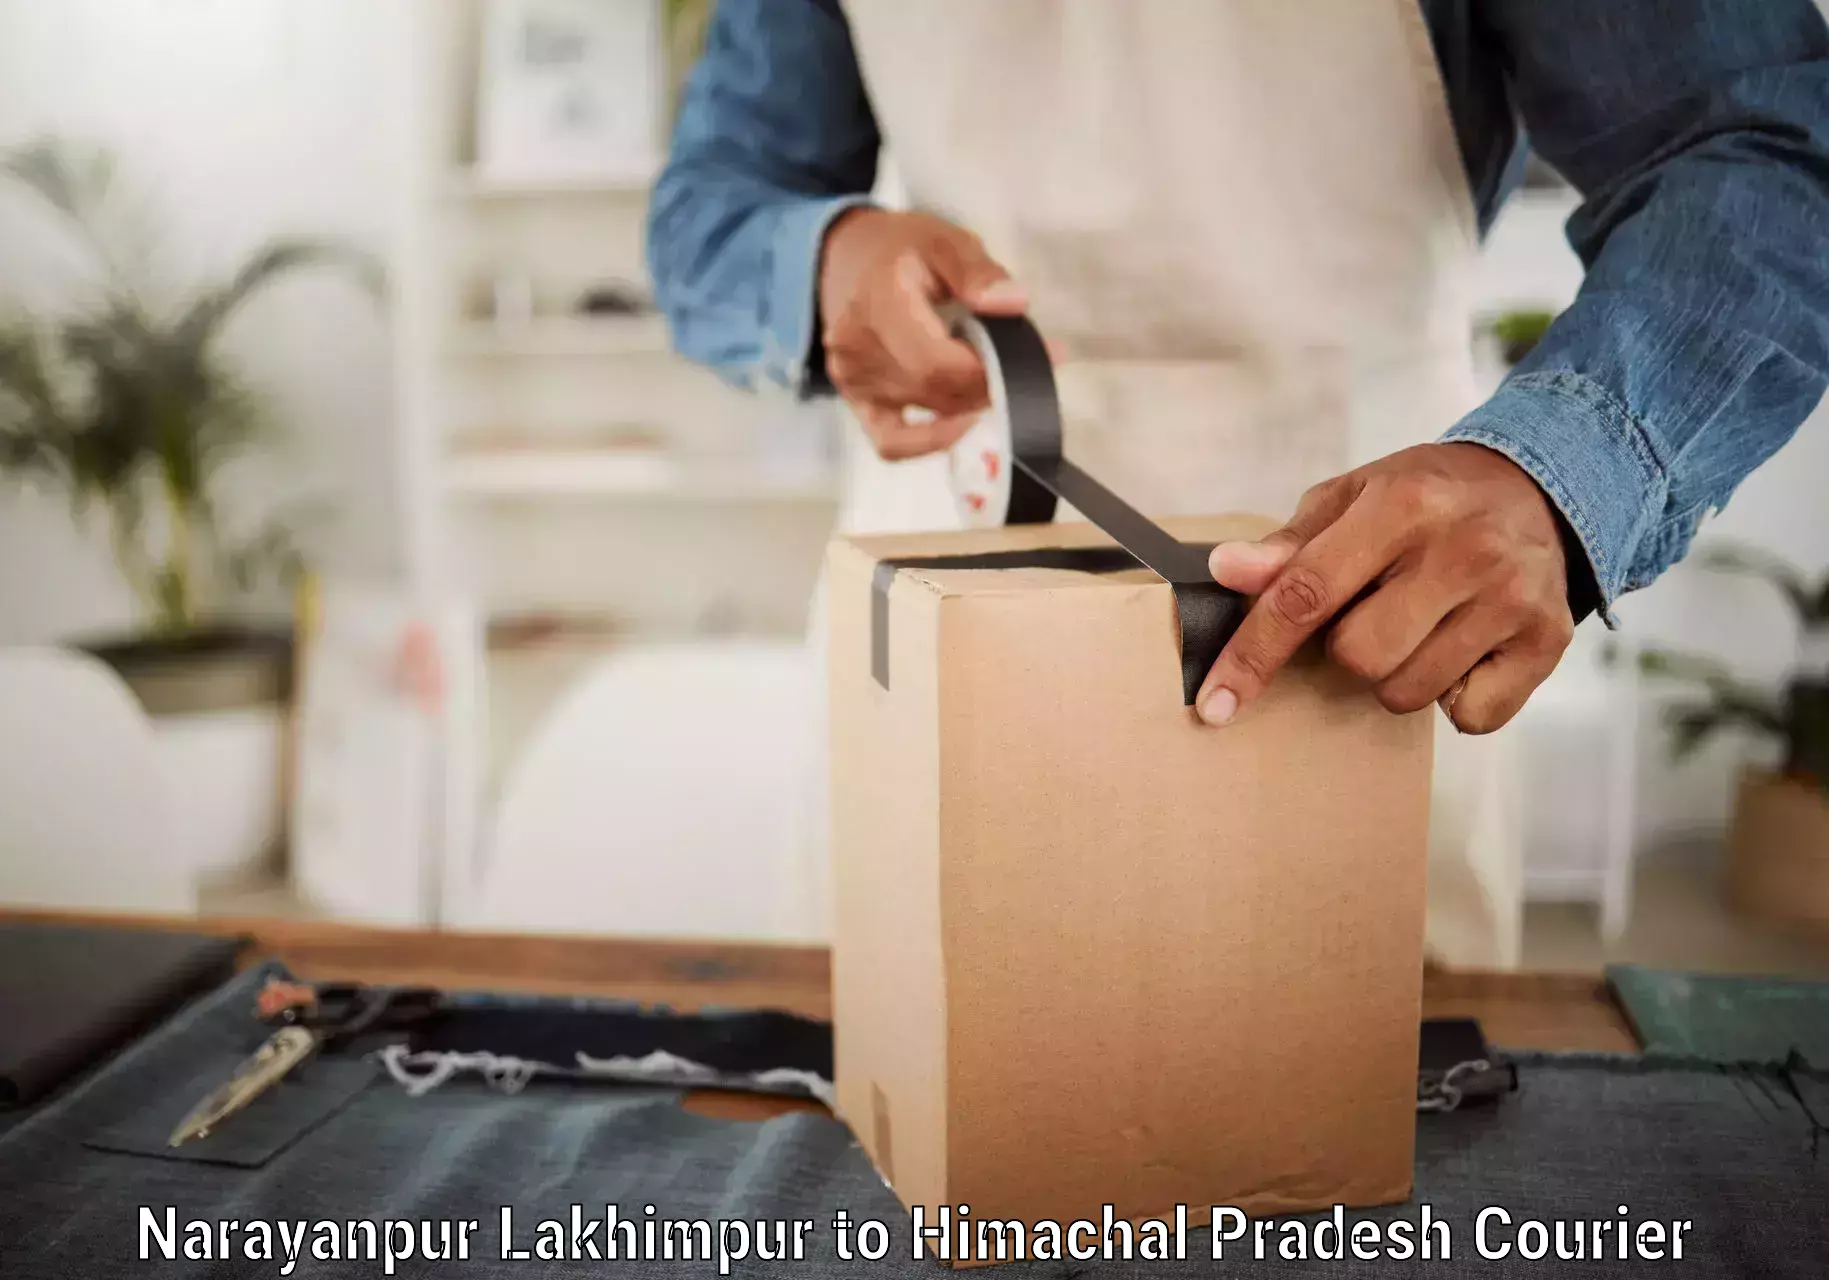 Reliable courier service Narayanpur Lakhimpur to Palampur